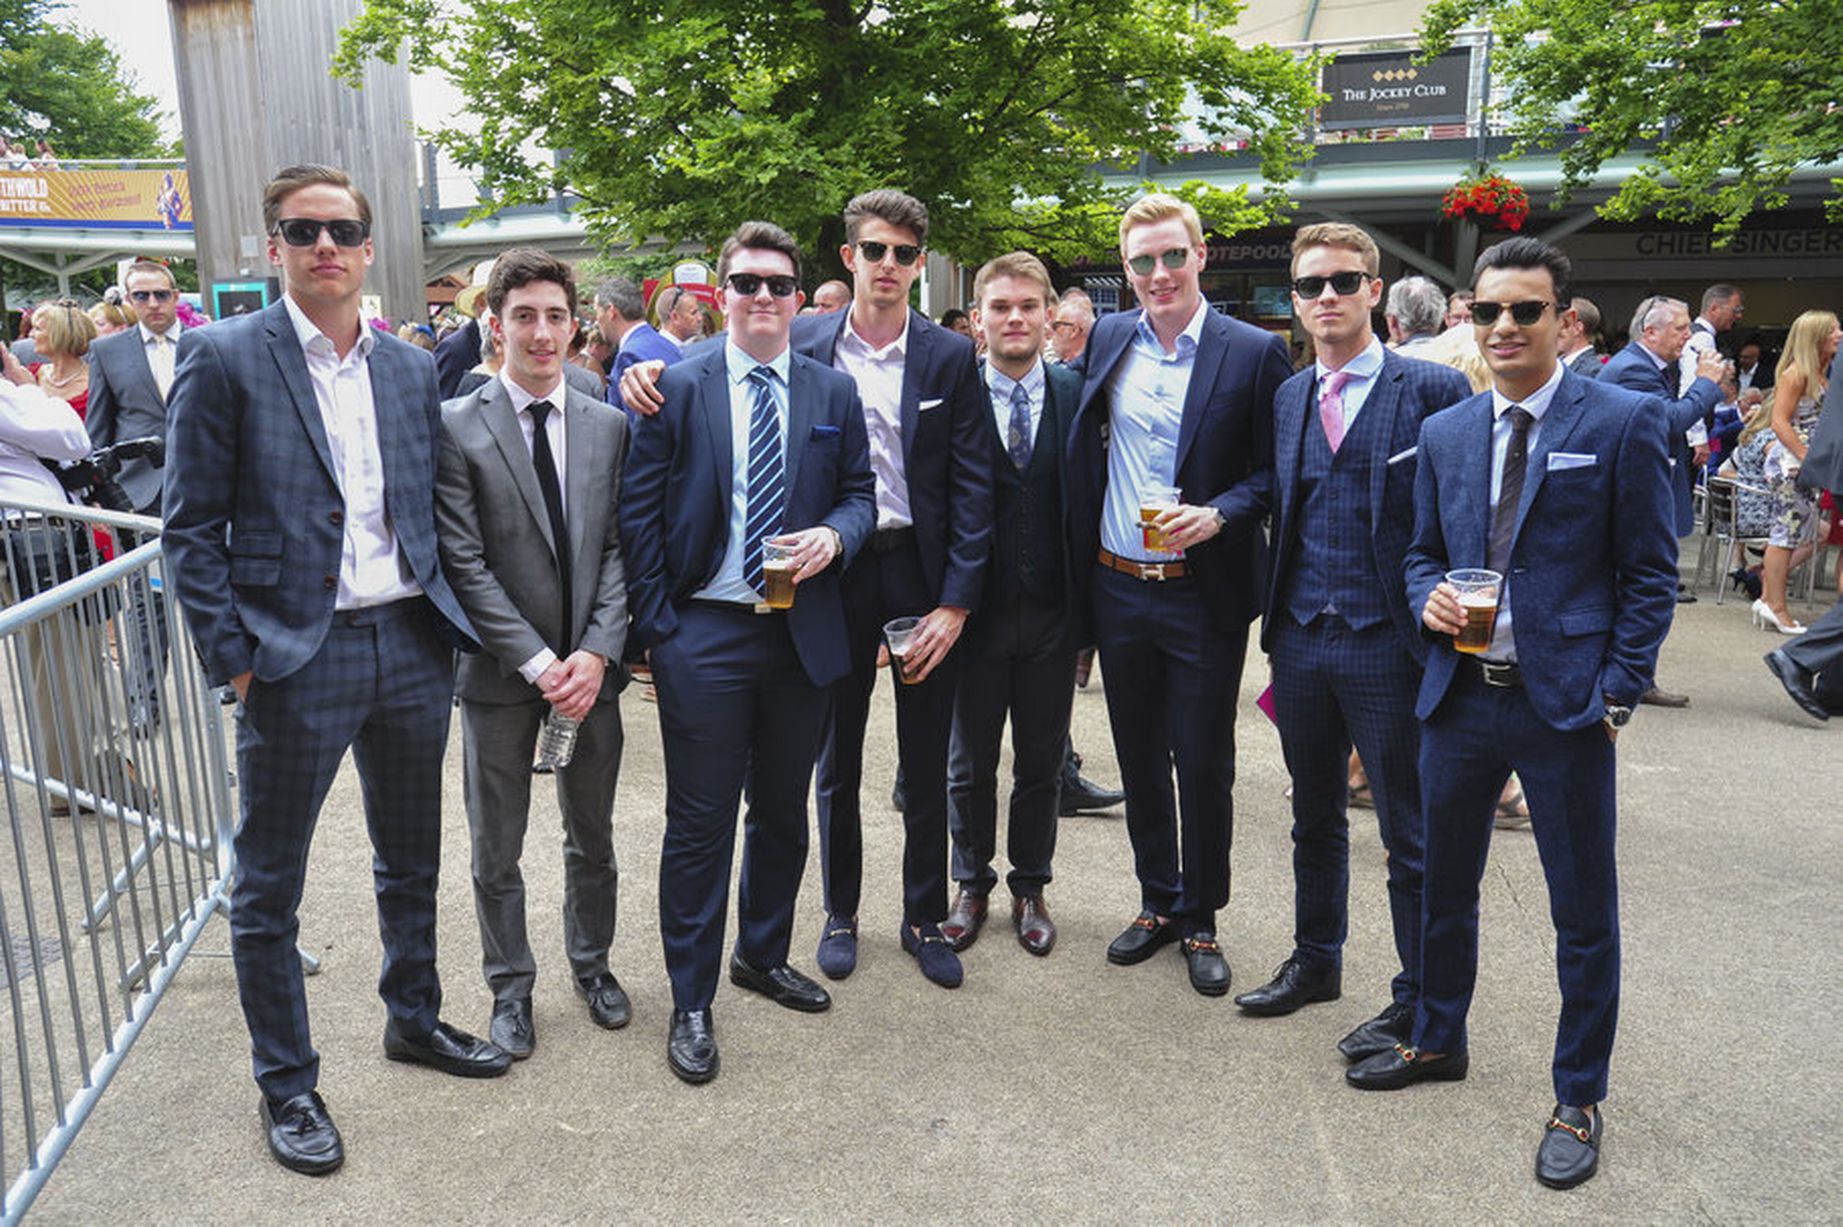 Some well-groomed men at the races - Cambridgeshire Live